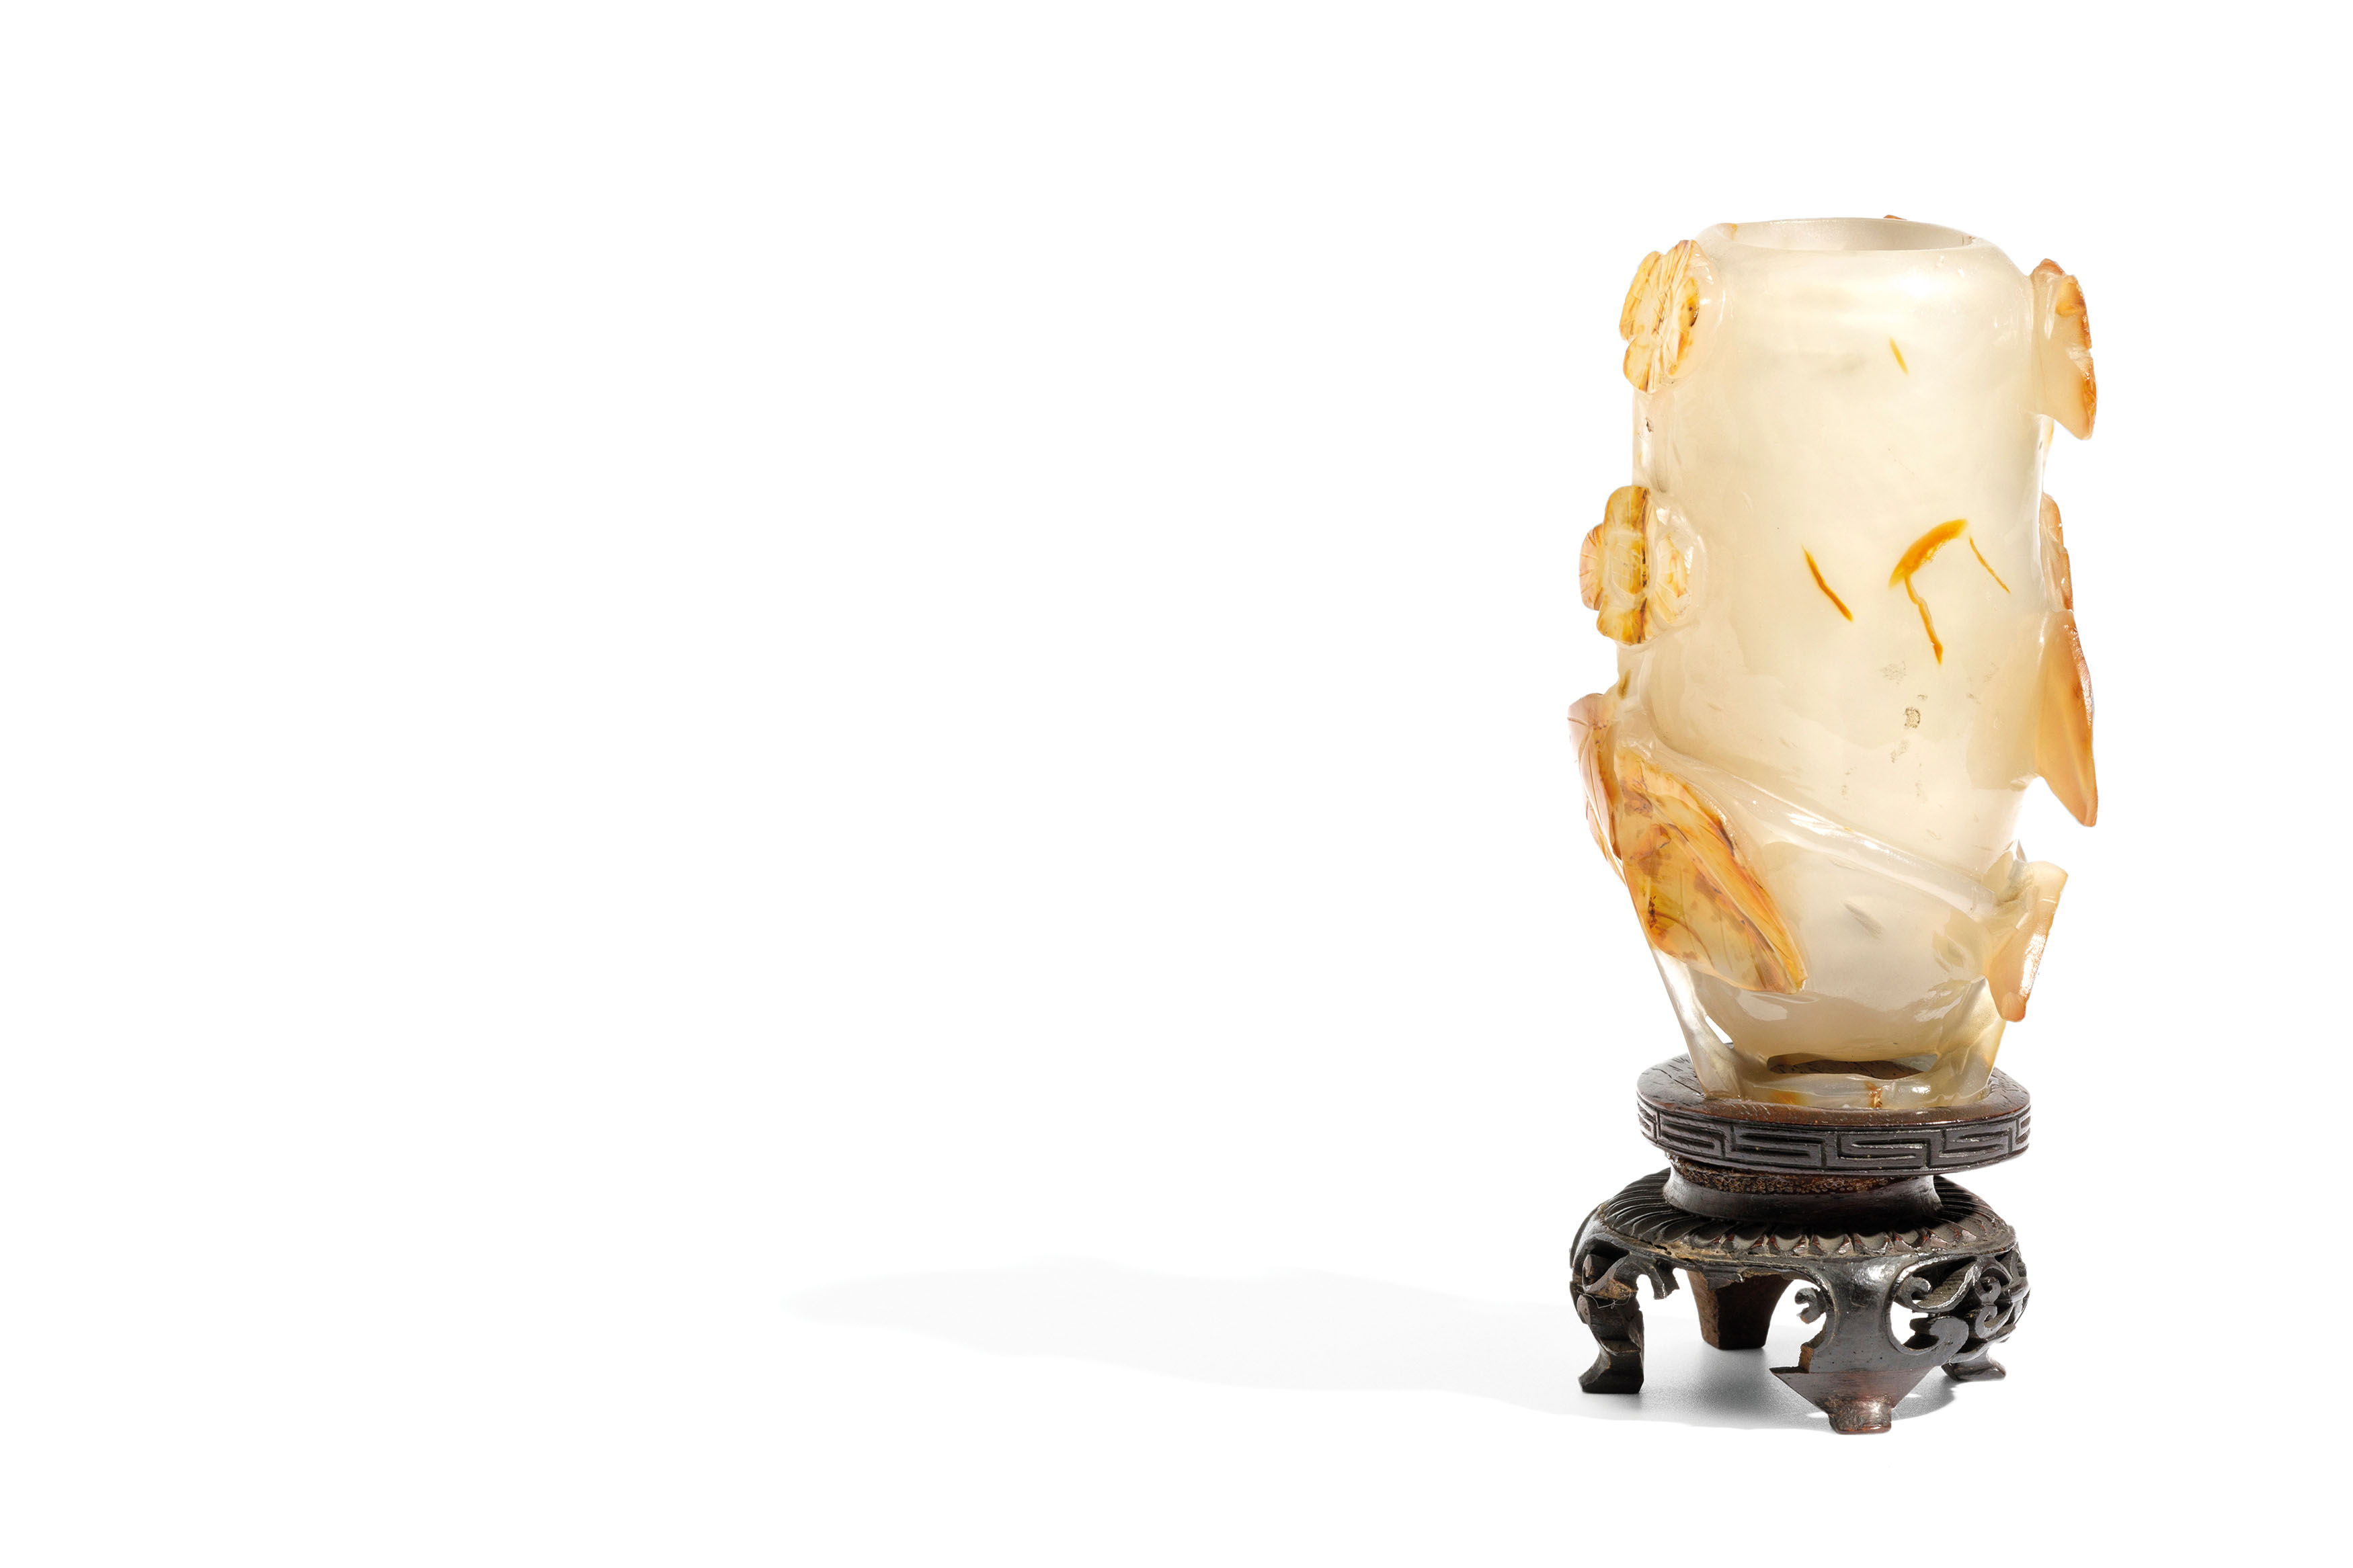 A SMALL AGATE VASE WITH RELIEF FLORAL DECORATION, CHINA, 20TH CENTURY - Image 3 of 3